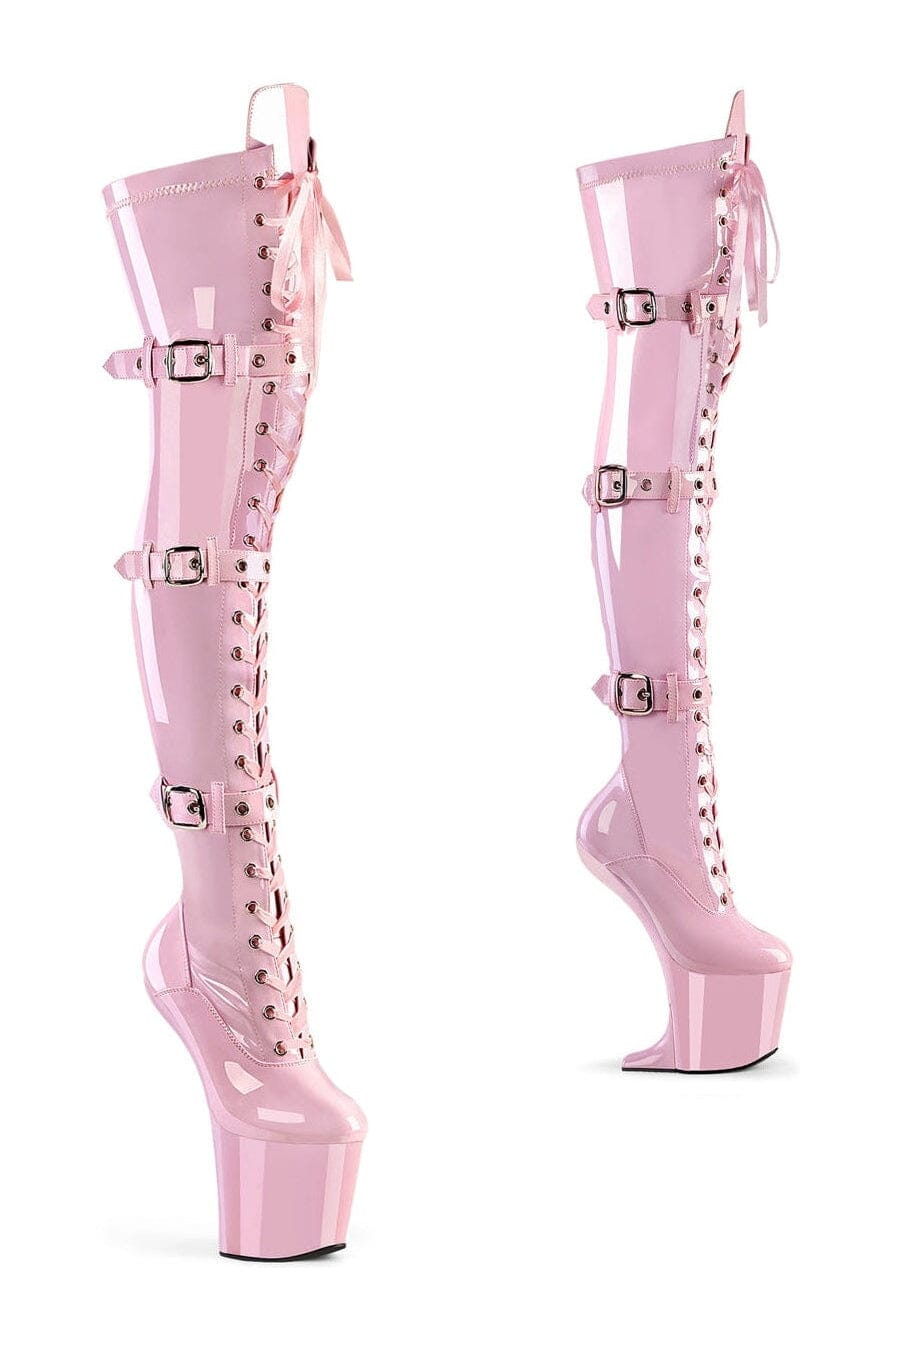 CRAZE-3028 Pink Patent Thigh Boot-Thigh Boots- Stripper Shoes at SEXYSHOES.COM